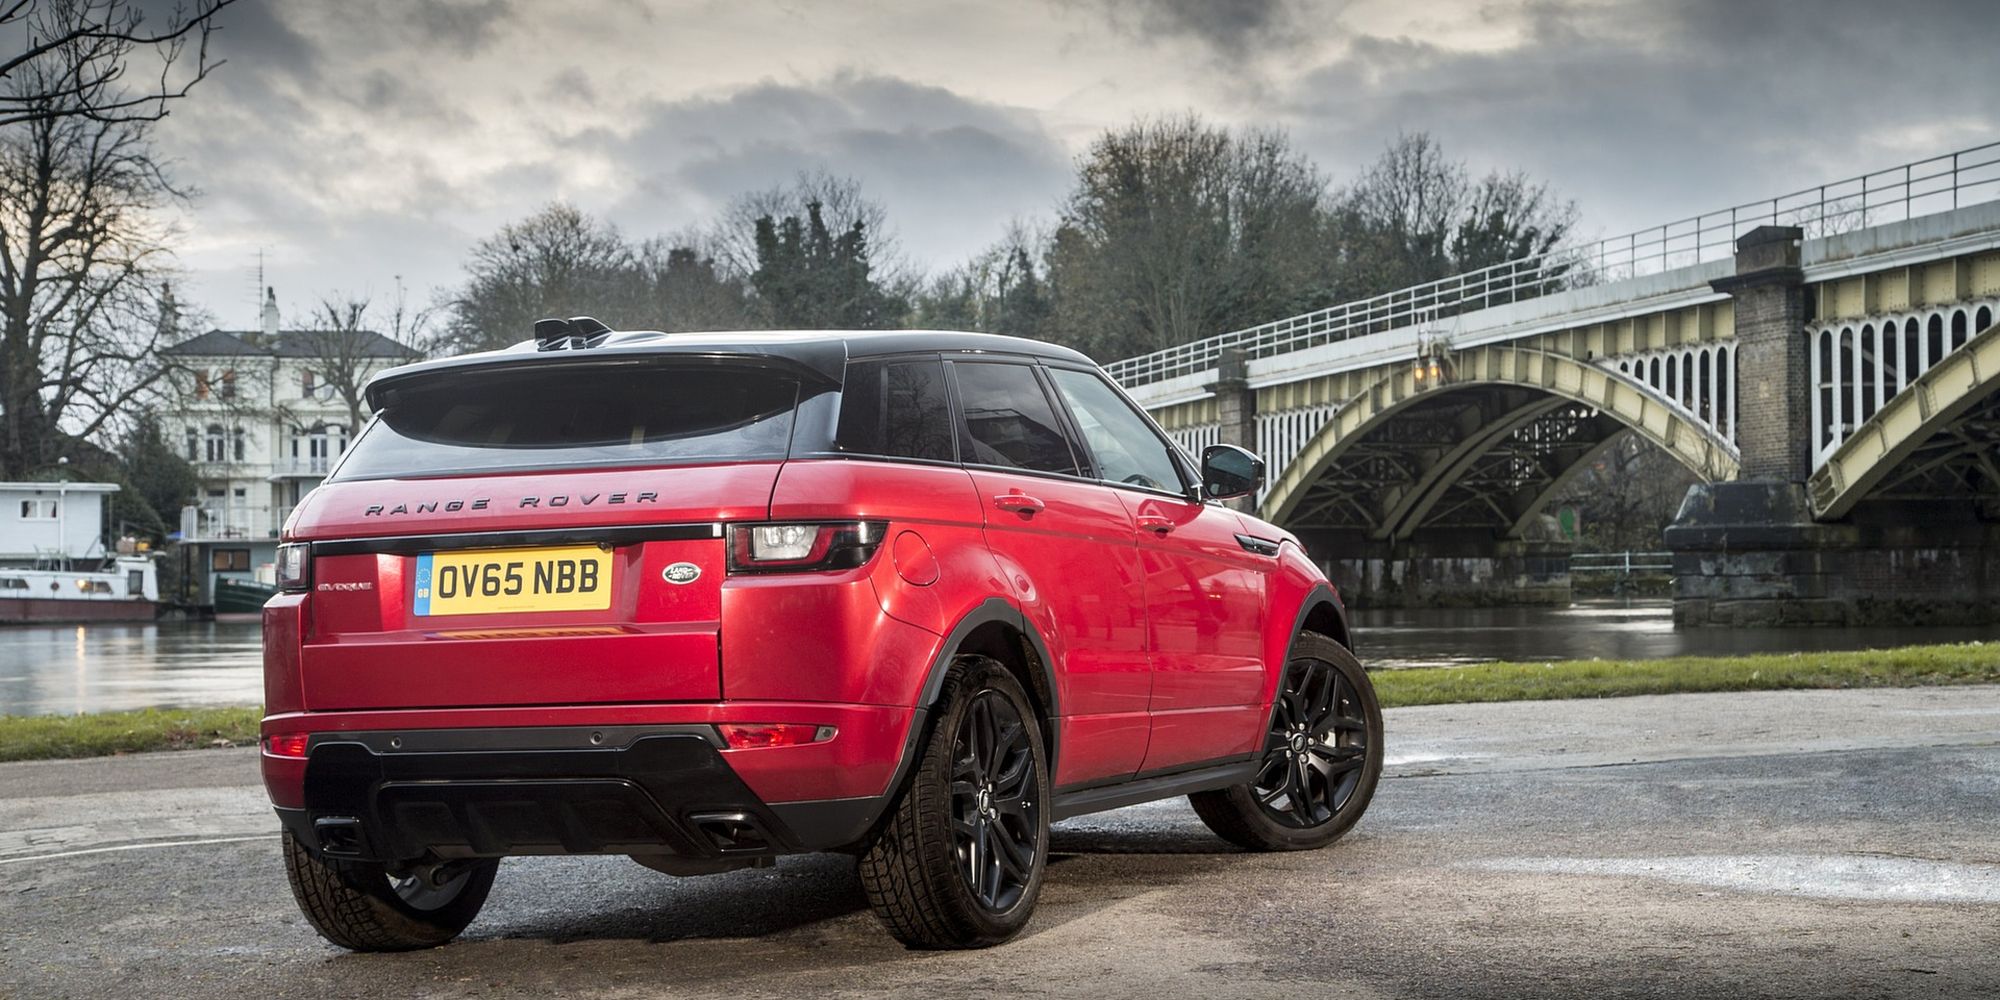 The rear of a red Evoque